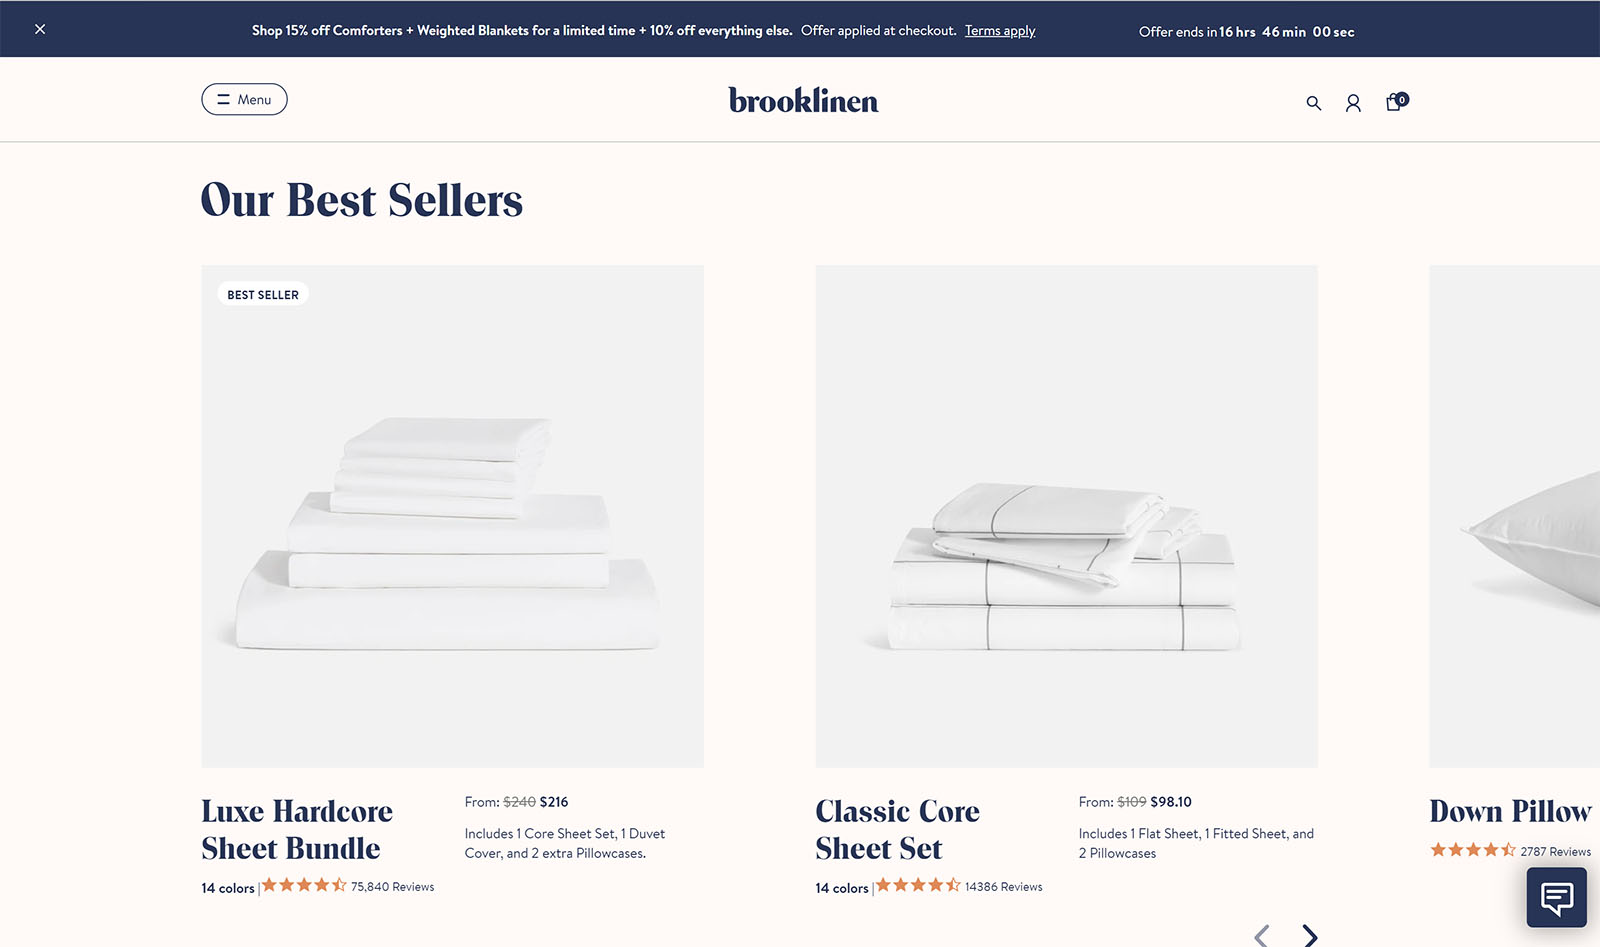 Featured products on Brooklinen.com